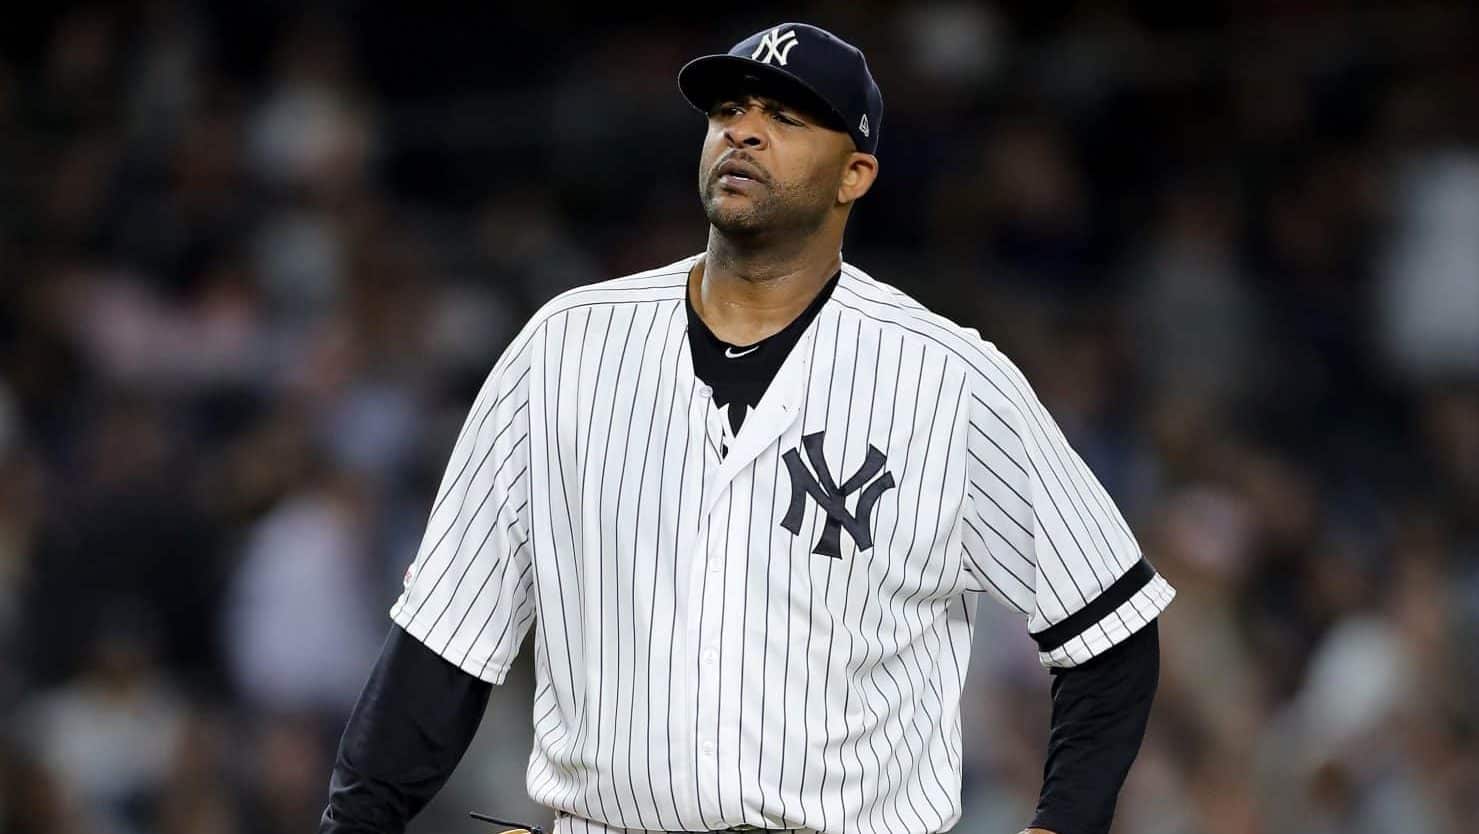 NEW YORK, NEW YORK - SEPTEMBER 18: CC Sabathia #52 of the New York Yankees reacts as he is about to be pulled from the game in the third inning against the Los Angeles Angels at Yankee Stadium on September 18, 2019 in the Bronx borough of New York City.